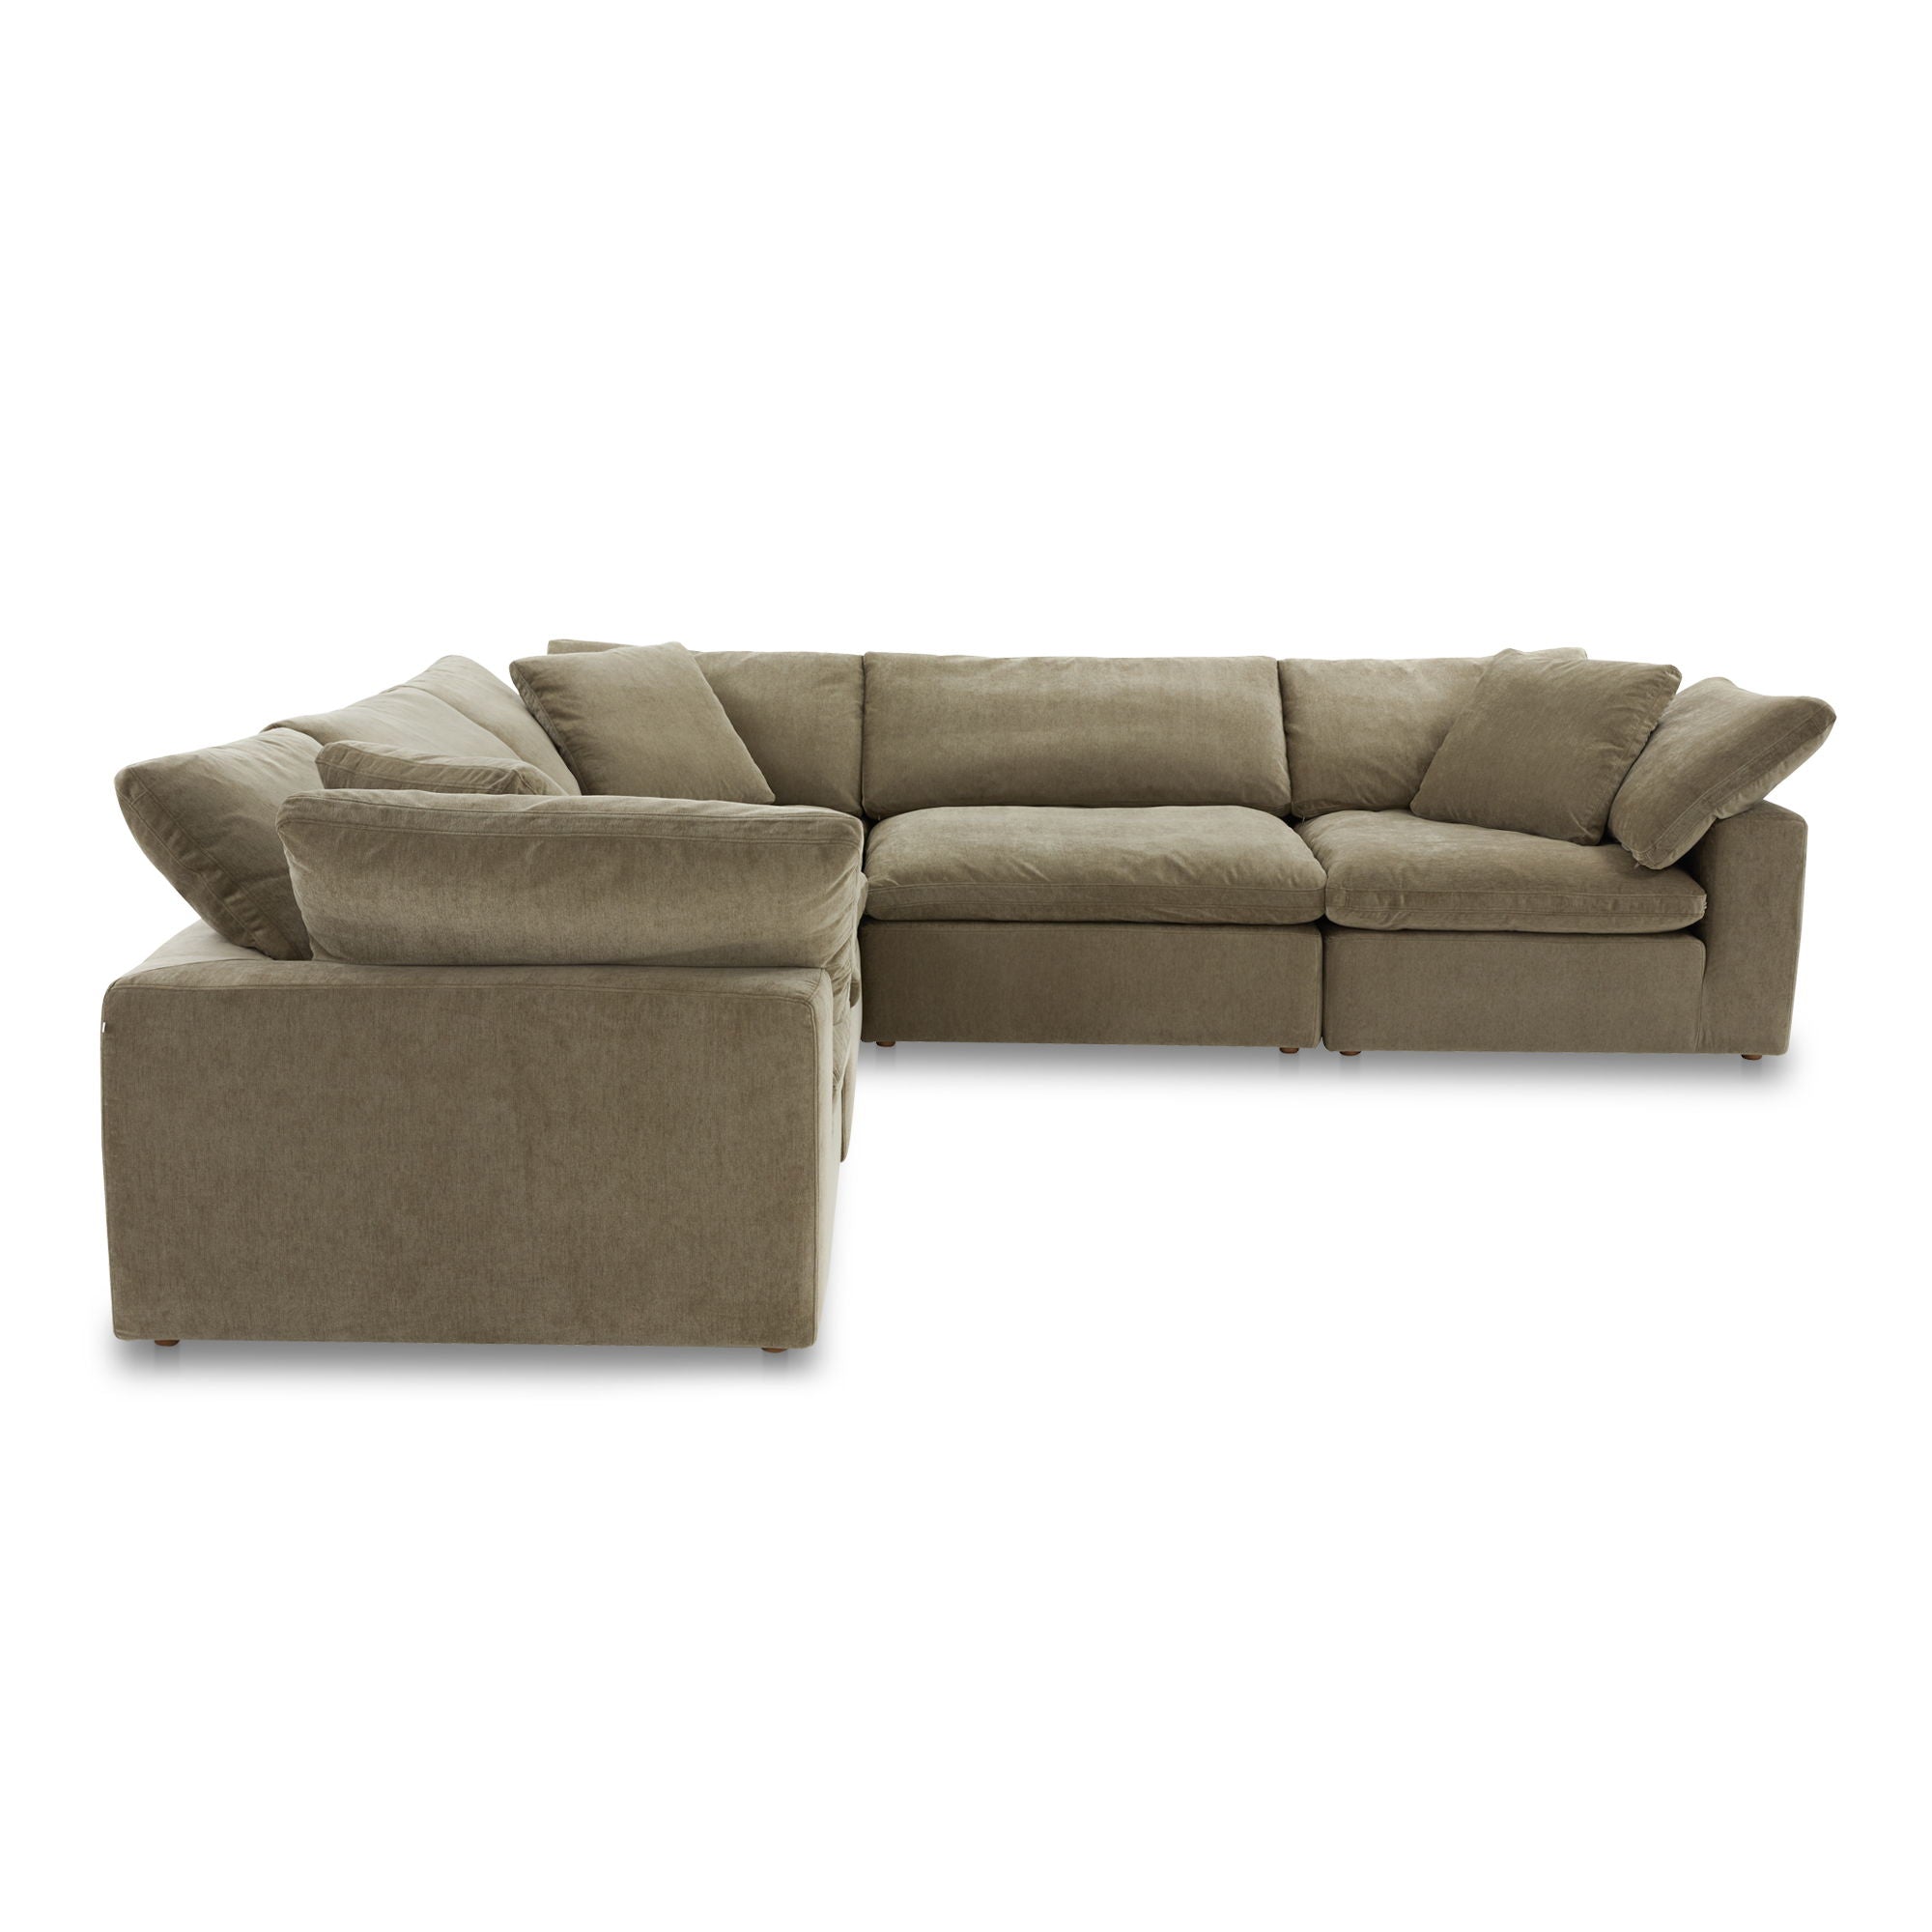 Clay Classic - L Modular Sectional Performance - Desert Sage-Stationary Sectionals-American Furniture Outlet